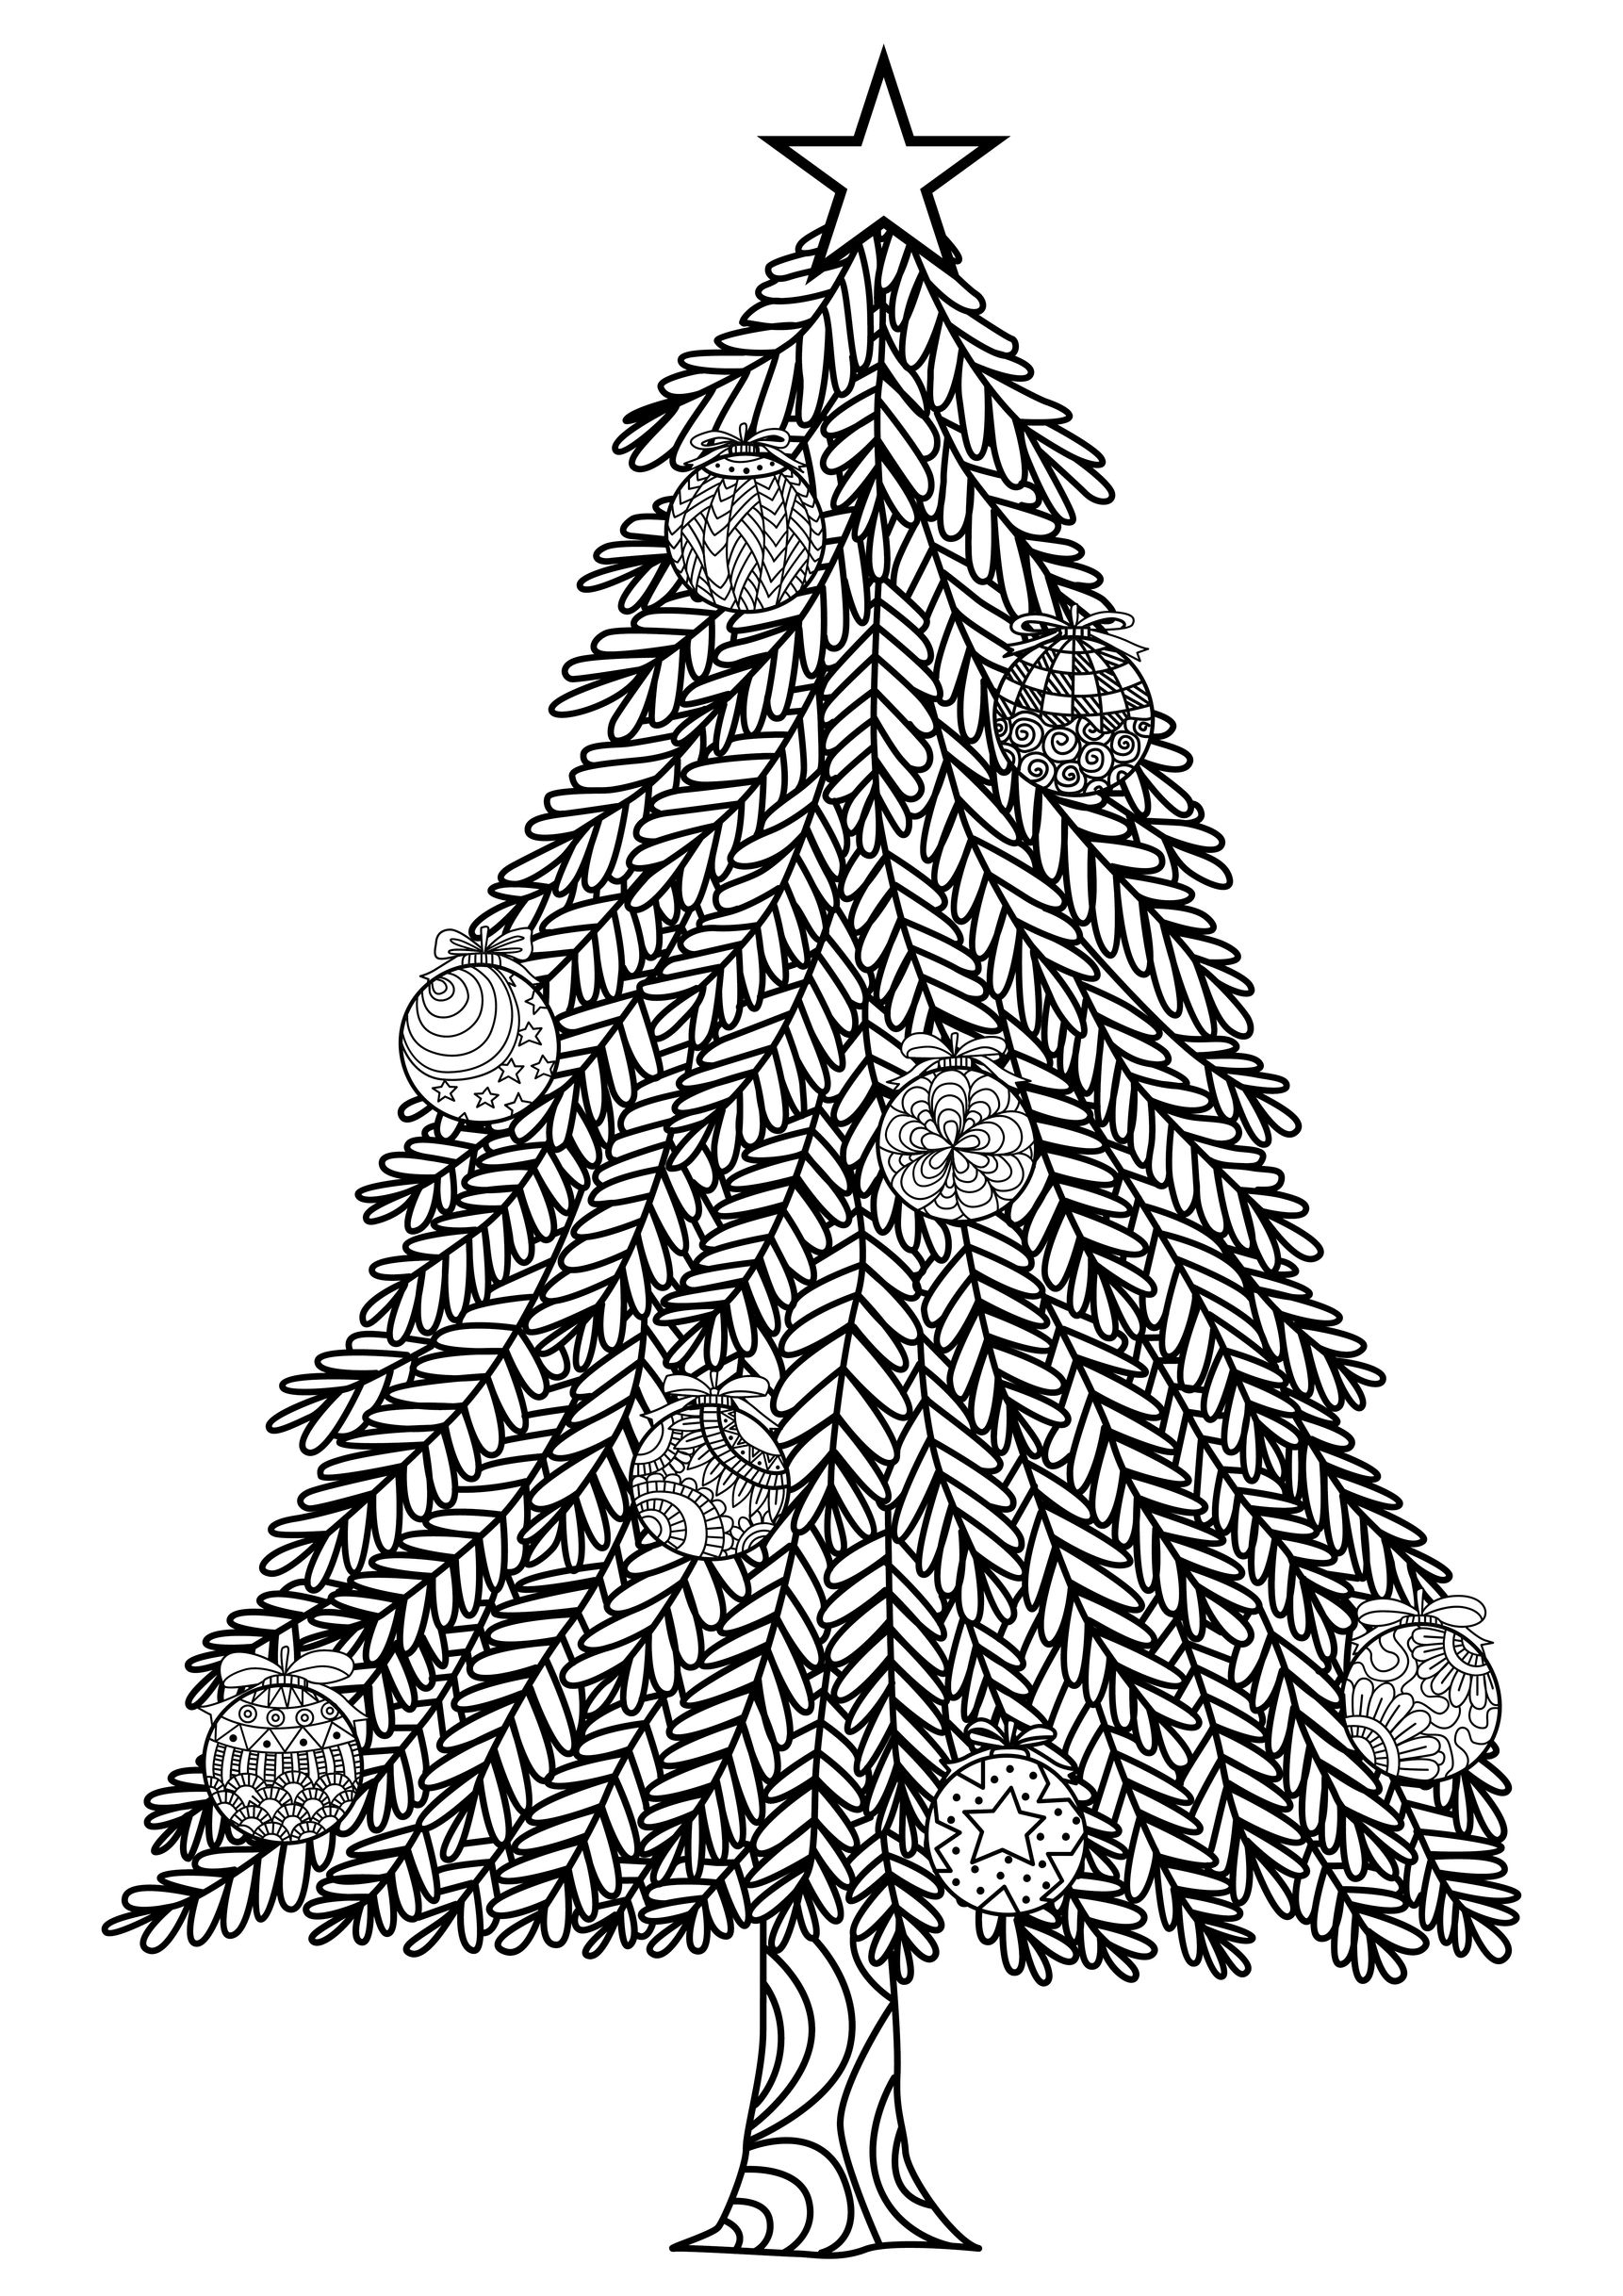 Christmas Tree With Ball Ornaments - Christmas Adult Coloring Pages - Free Printable Christmas Tree Images